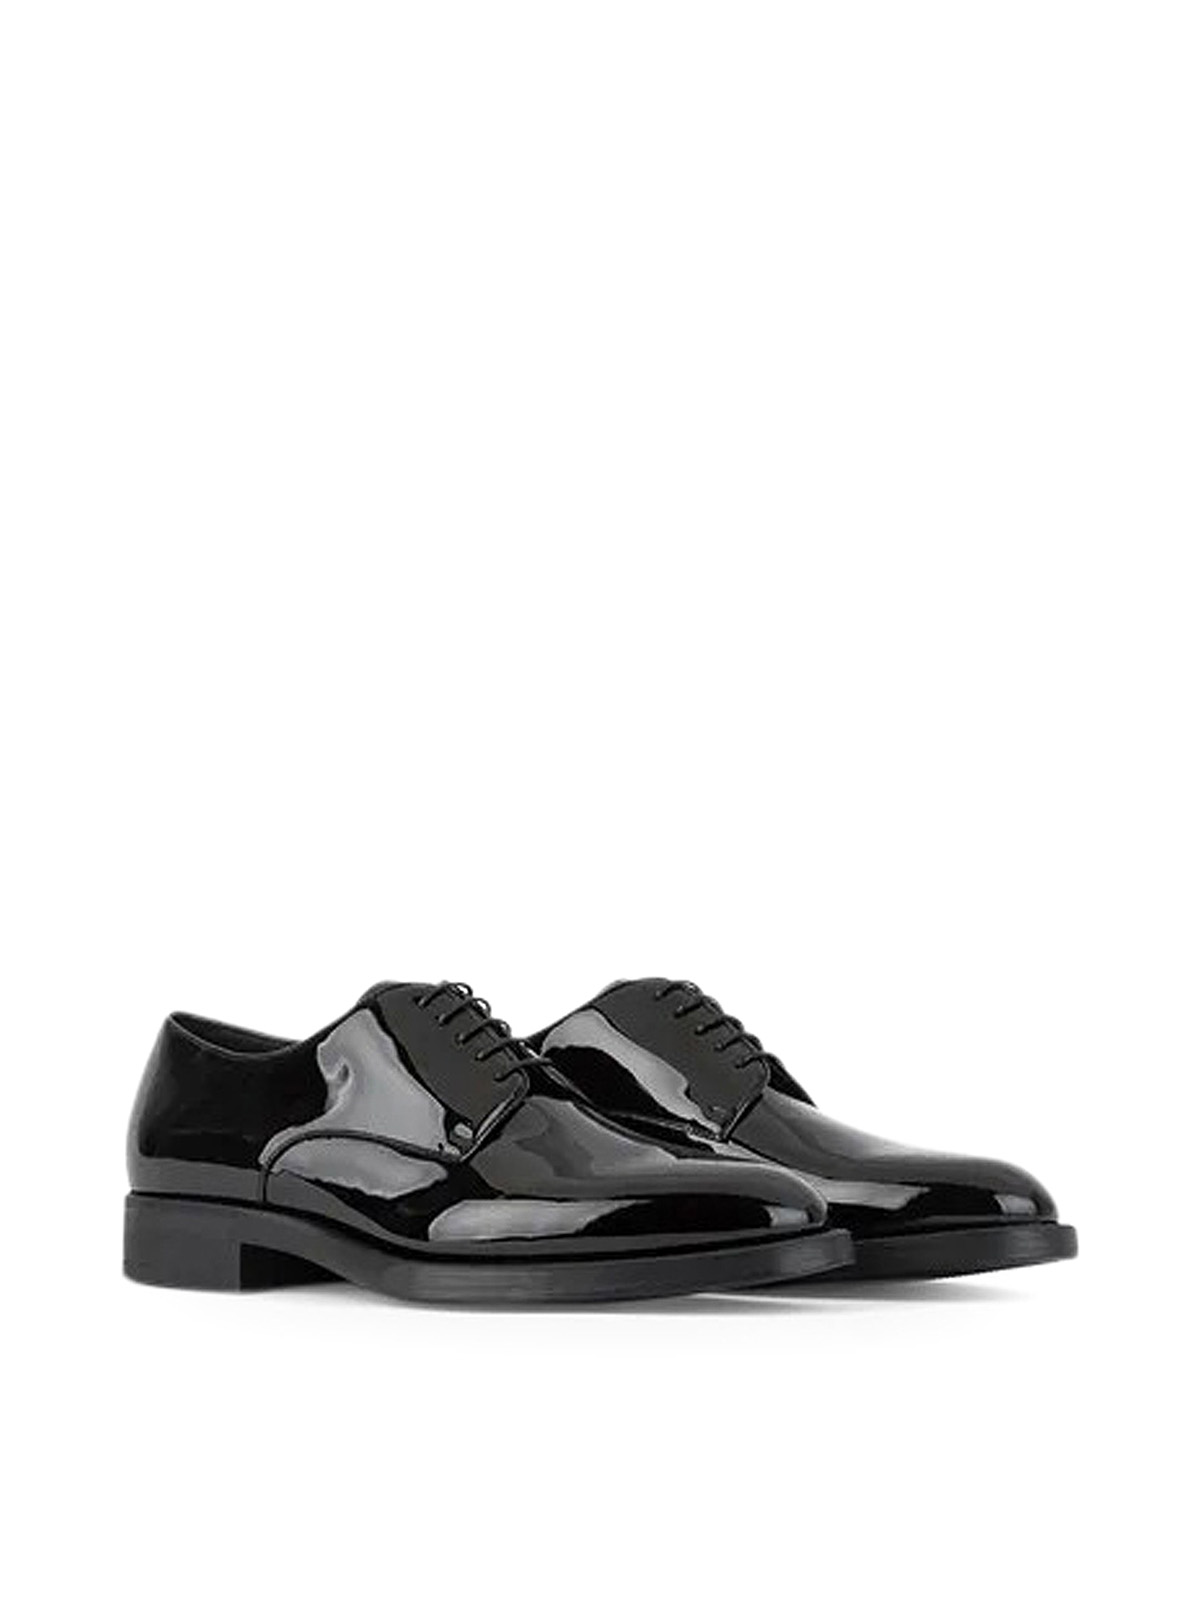 verhaal vrijwilliger Ontwapening Classic shoes Giorgio Armani - Patent Derby shoes - X2C679XAT2400002